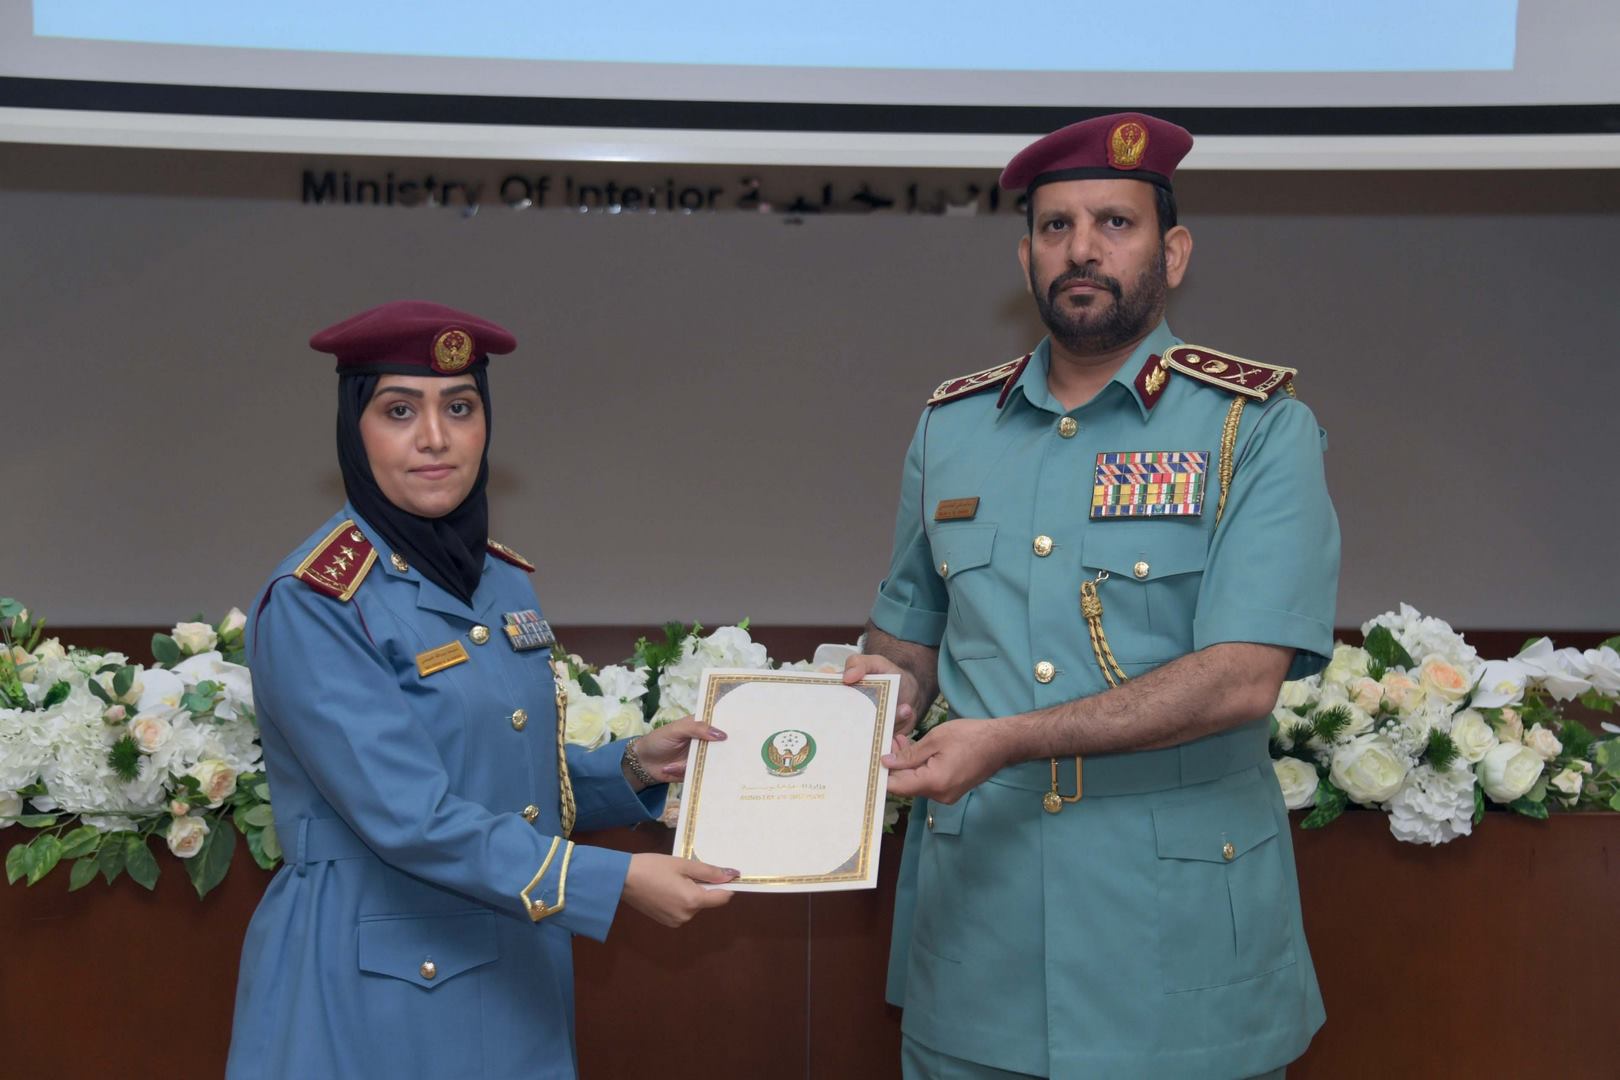 Best Police Practices Forum at the Ministry of Interior